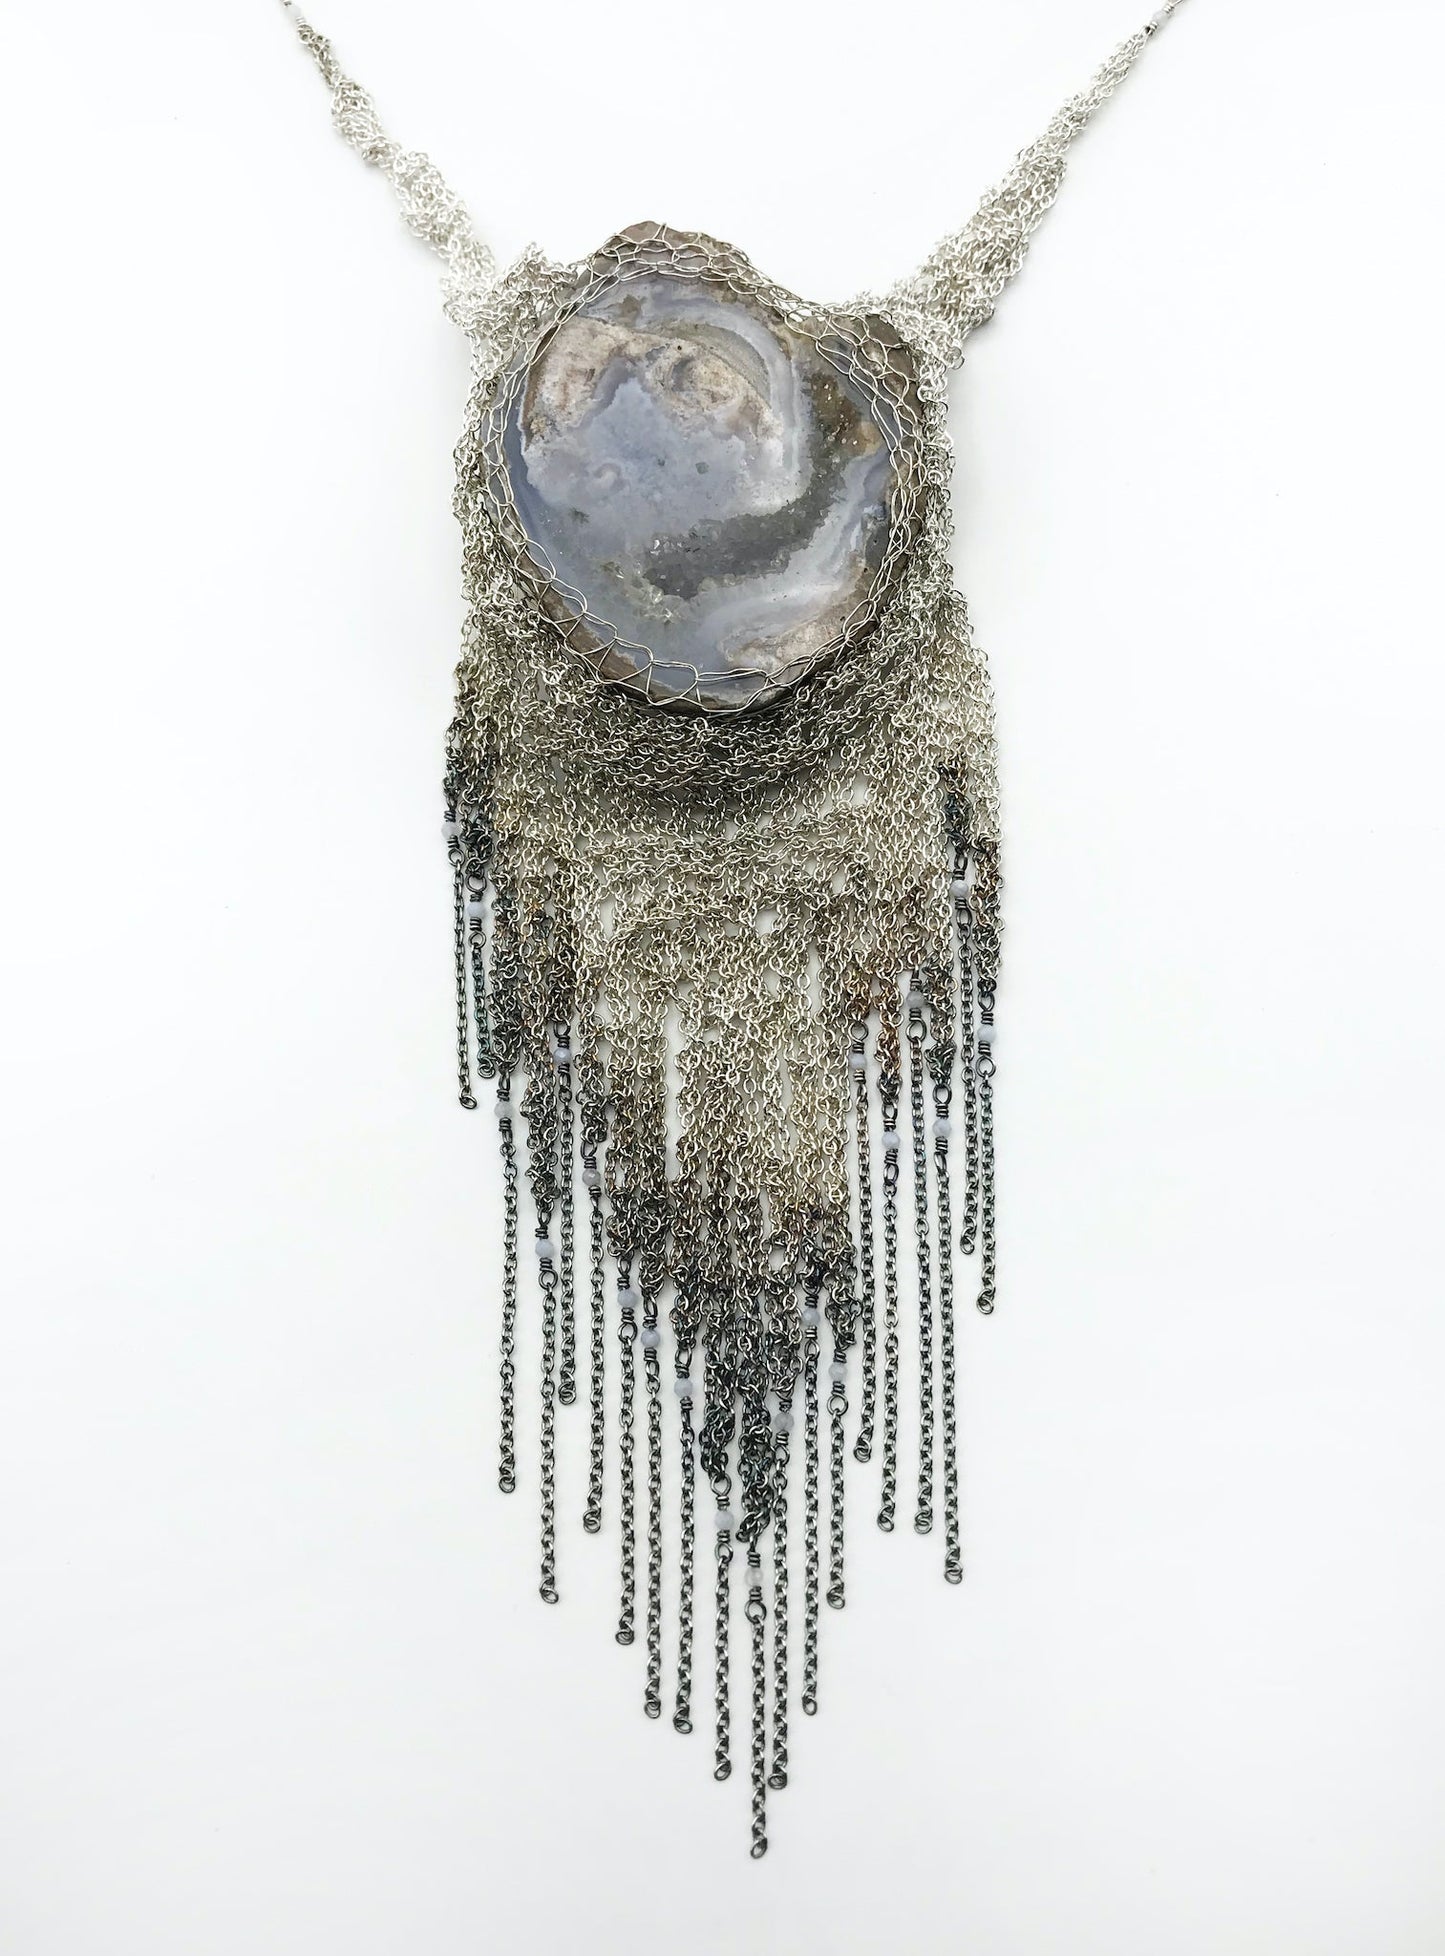 Necklace: OOAK: steel/silver: large: artist’s choice druzy crystal